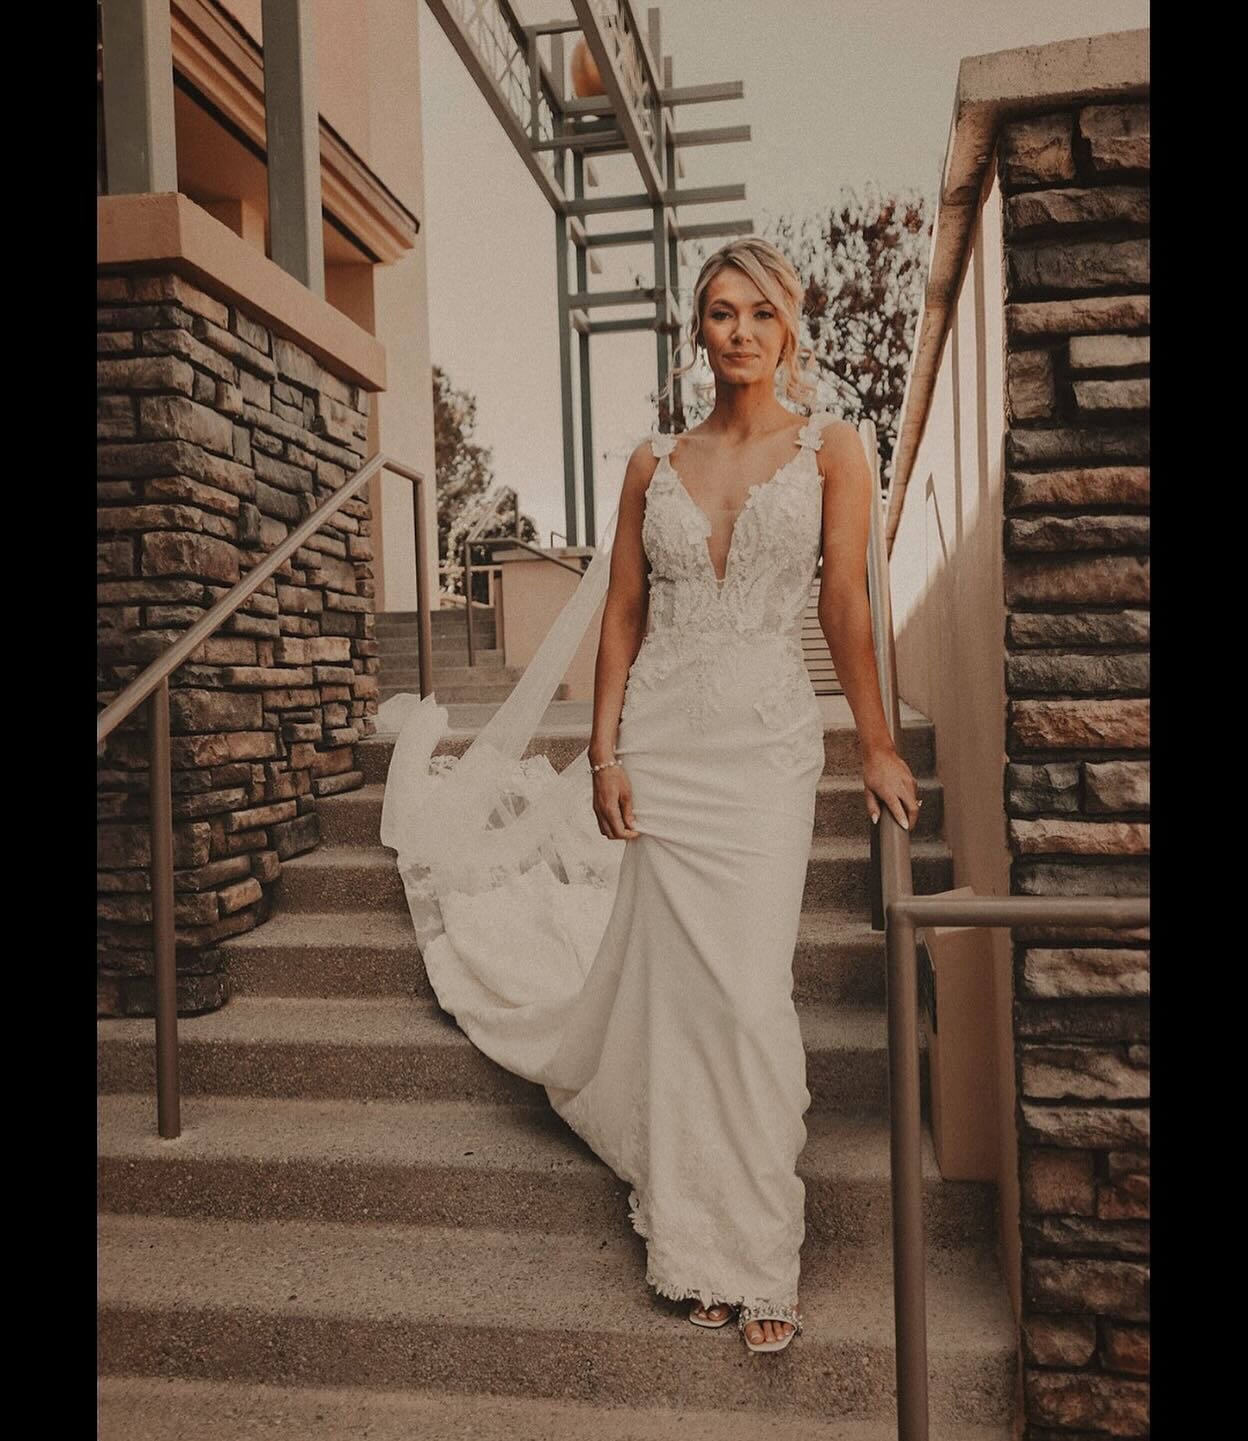 I&rsquo;ve only just finished culling through this wedding and true editing starts this week but I literally cannot resist posting my stunning bride! I&rsquo;ve been so lucky to be a part of so many weddings but this one&hellip; Honestly no words. Fr